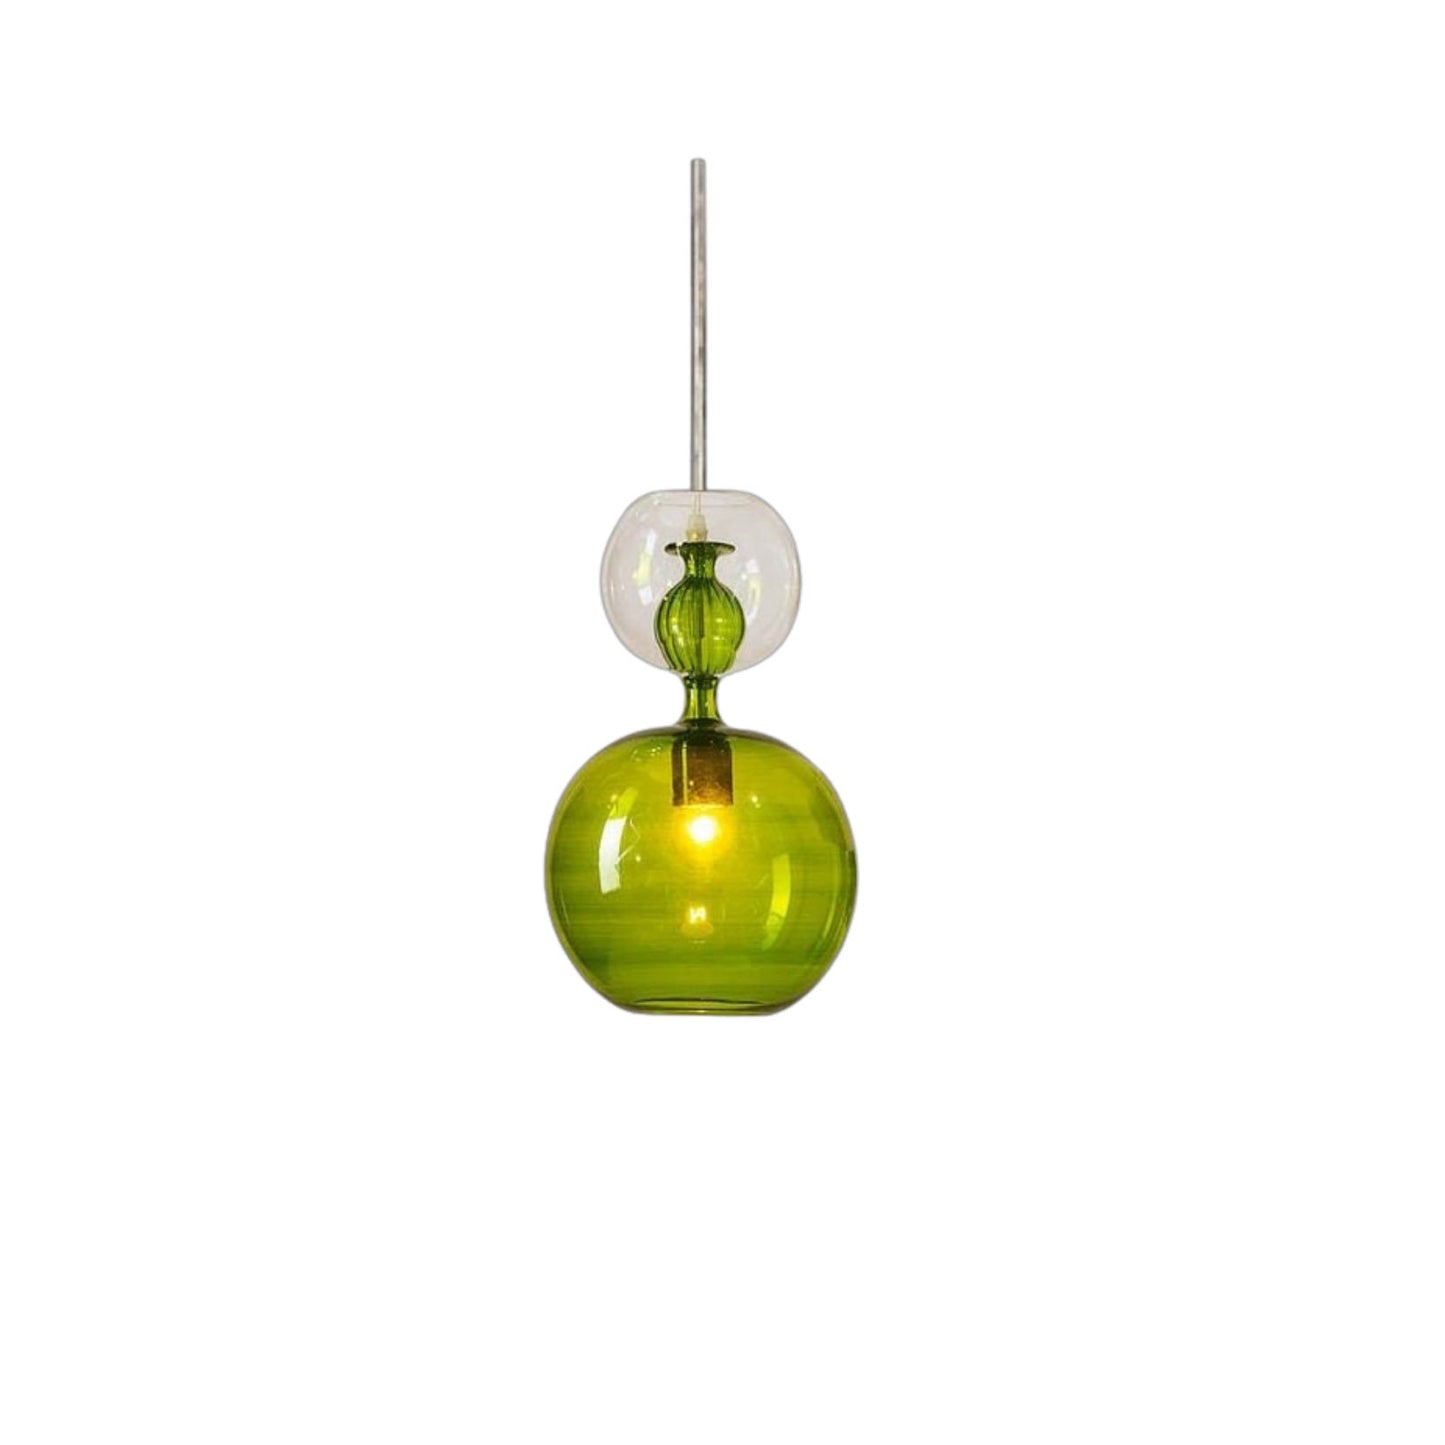 Green & Crystal Colored Handmade Modern Pendant Light , Deco Light Fixture , Hanging Lamp for Dining Room Lights , Hand Blown Glass Pendant | Les Trois Pyramides